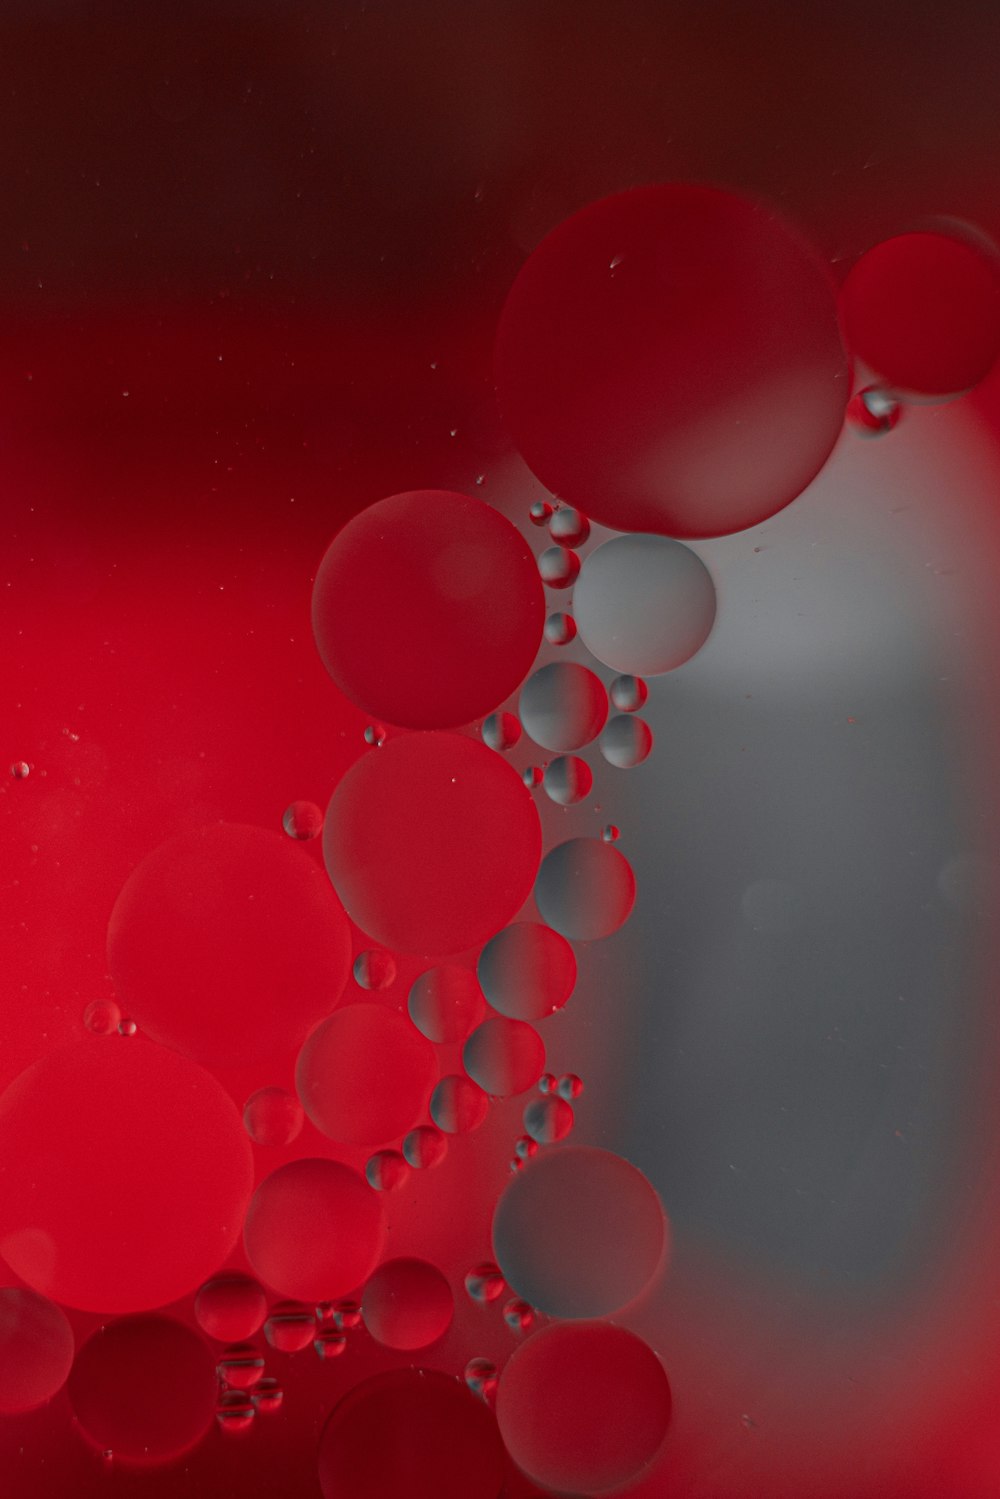 red balloons on red surface